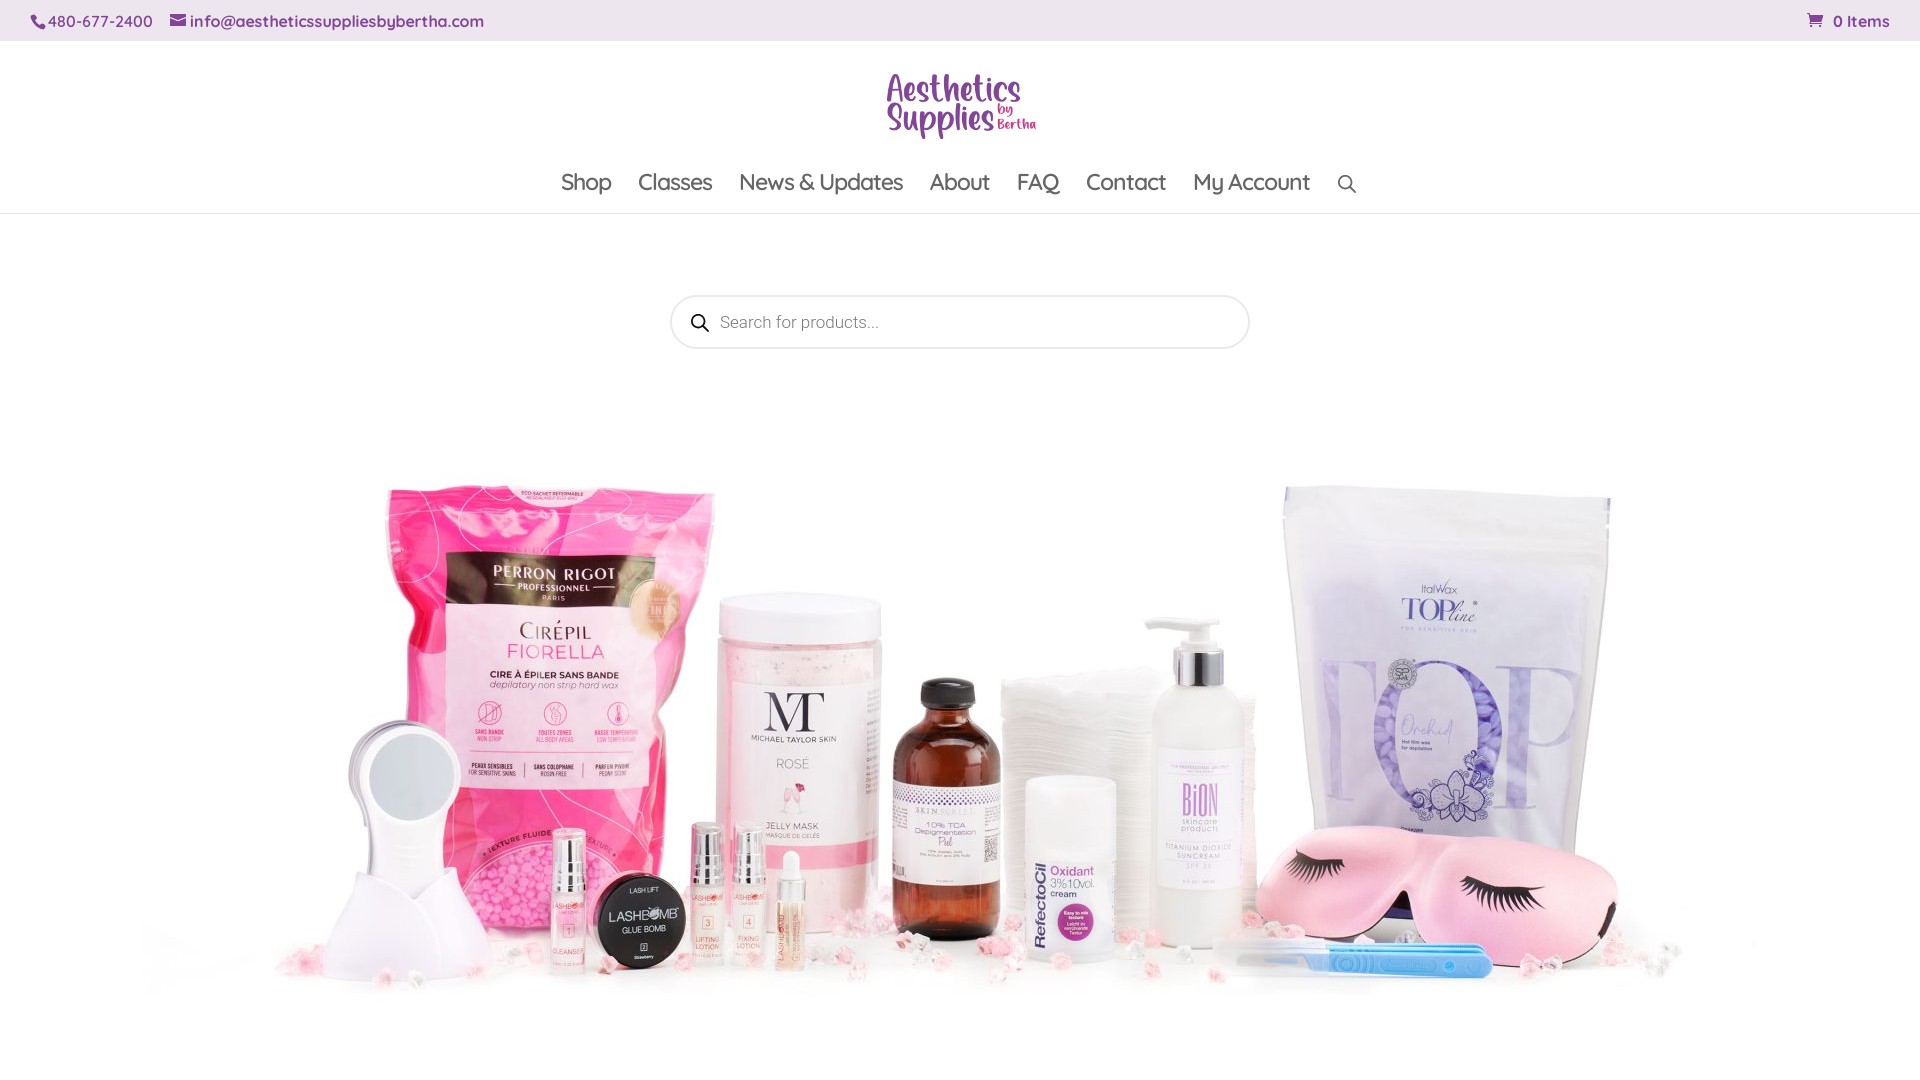 aesthetics supplies by bertha home page showing a group of beauty products